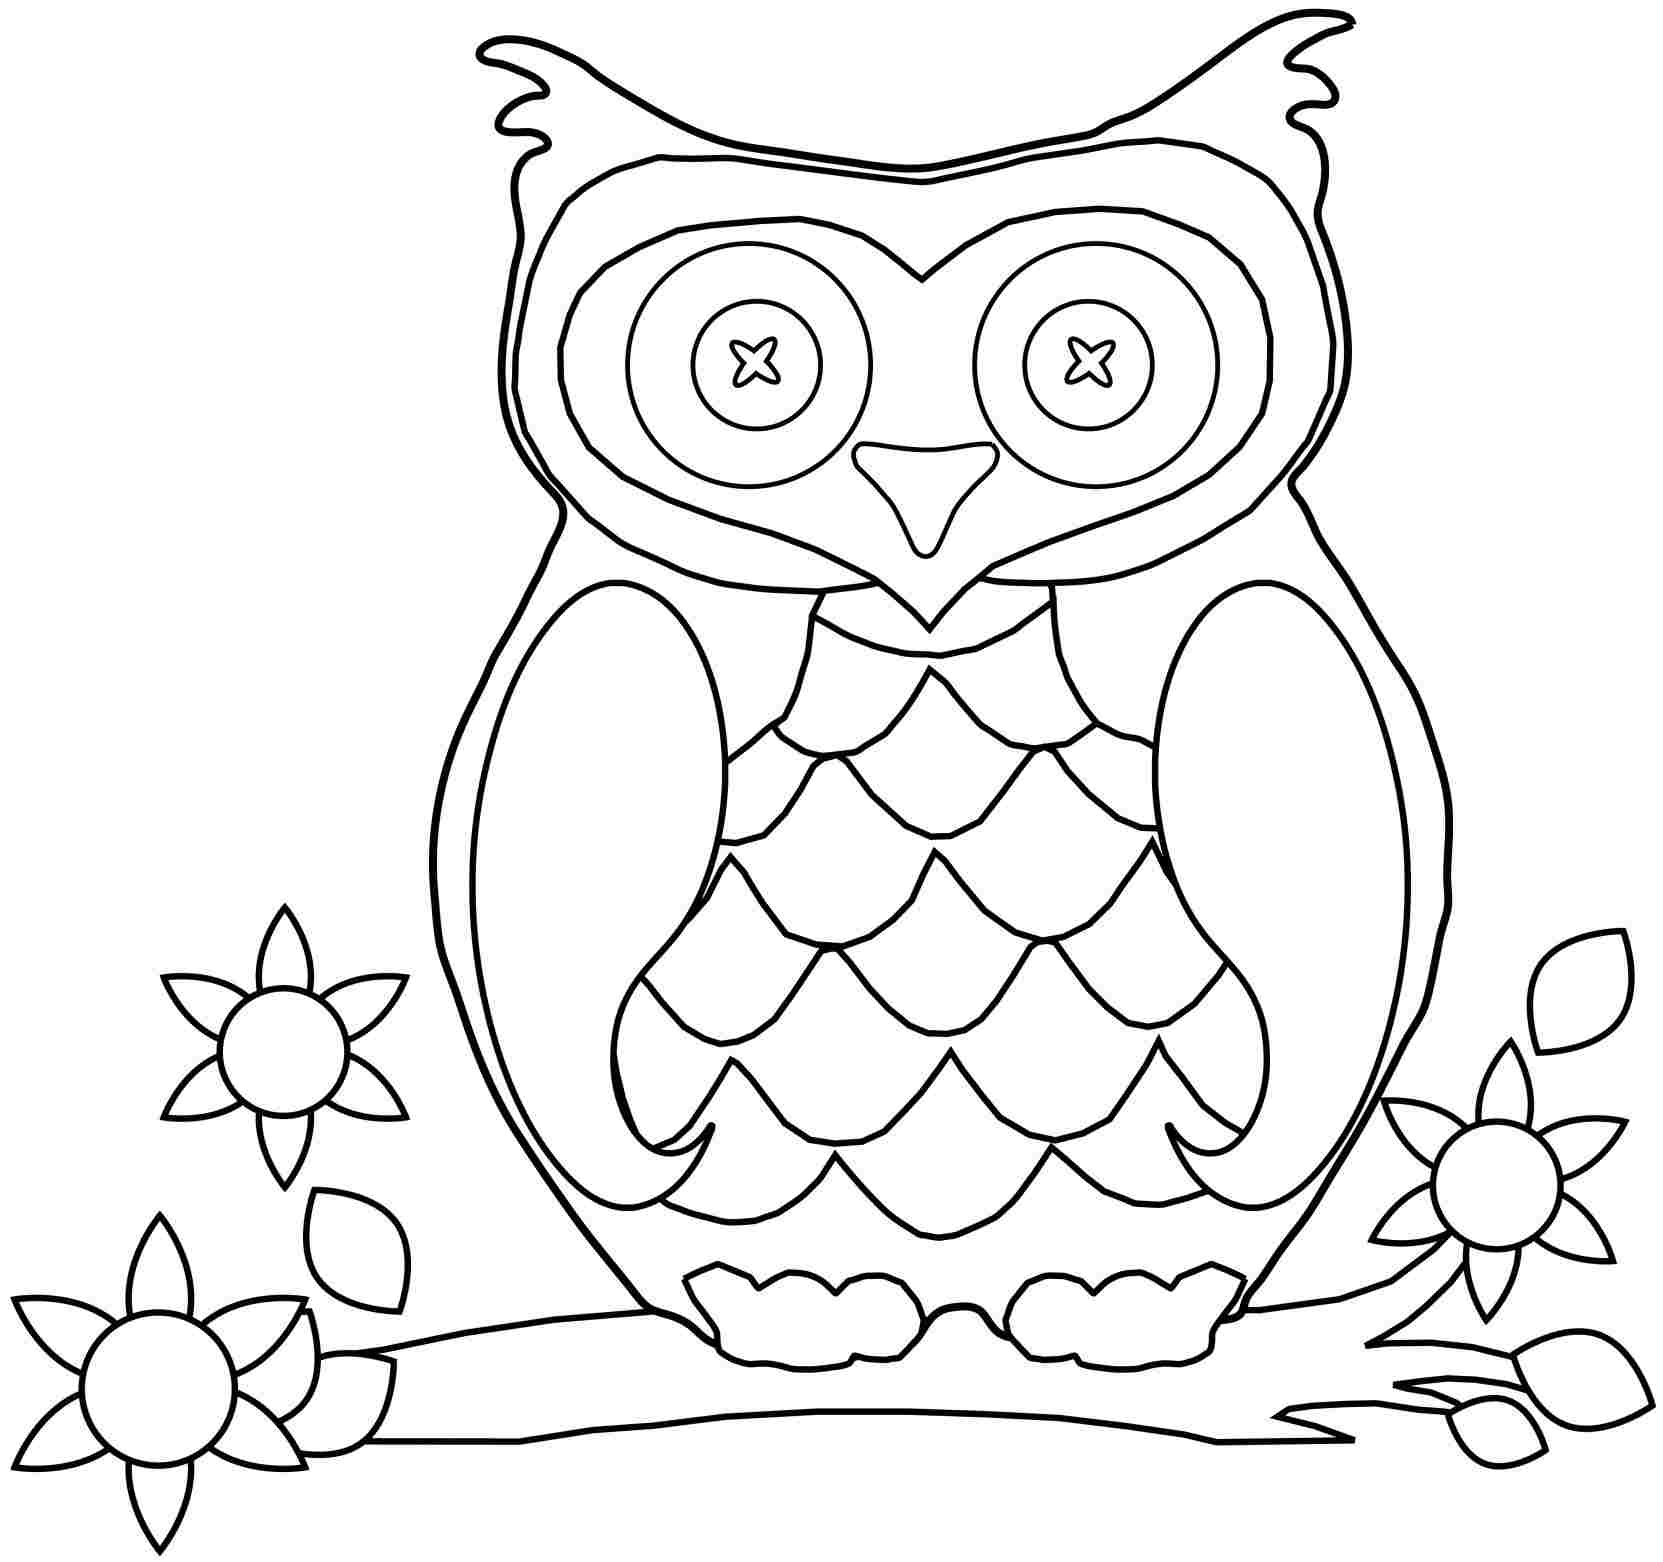 Printable Owl Coloring Pages For Kids Owls adult